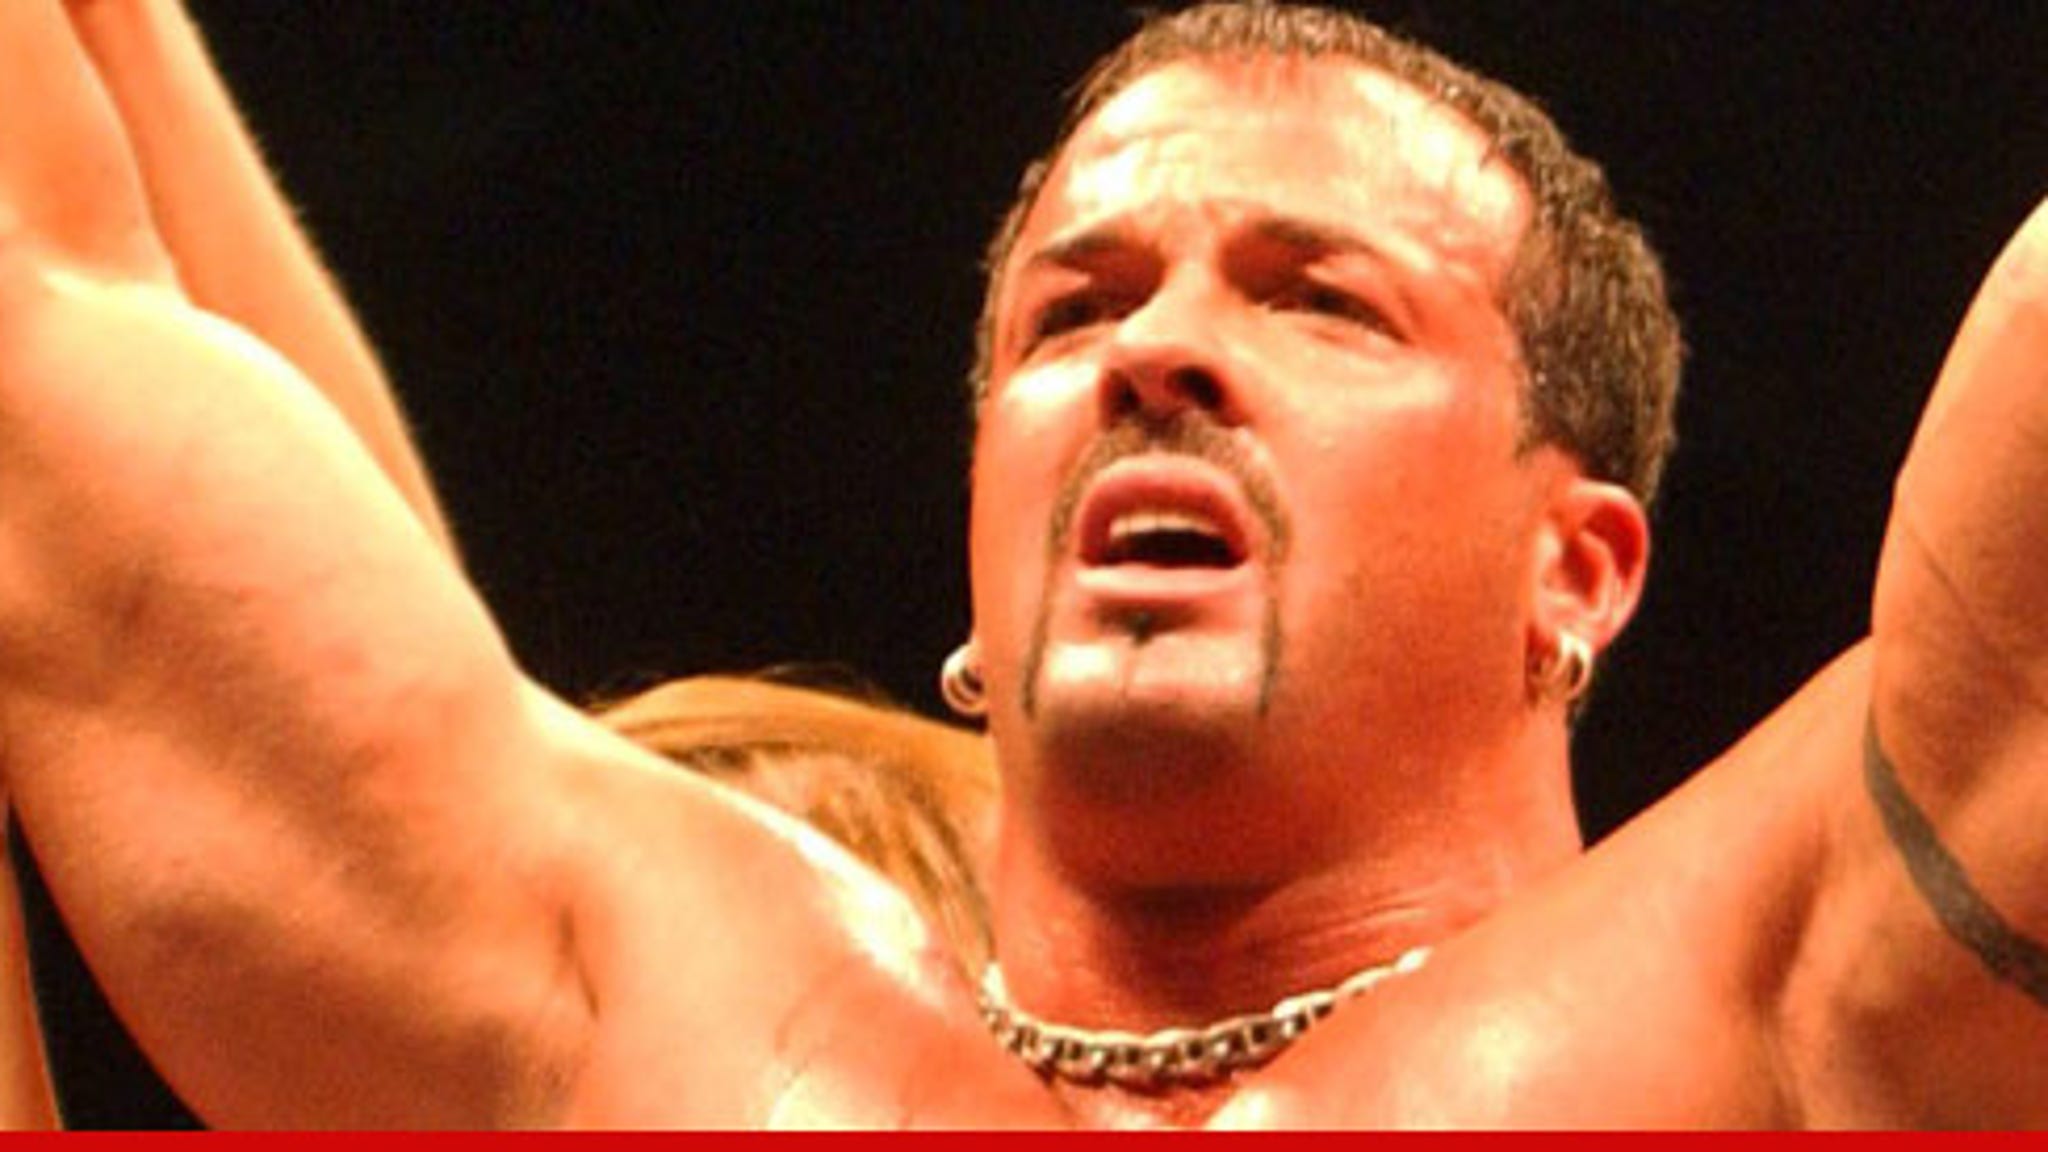 Accident buff bagwell wife